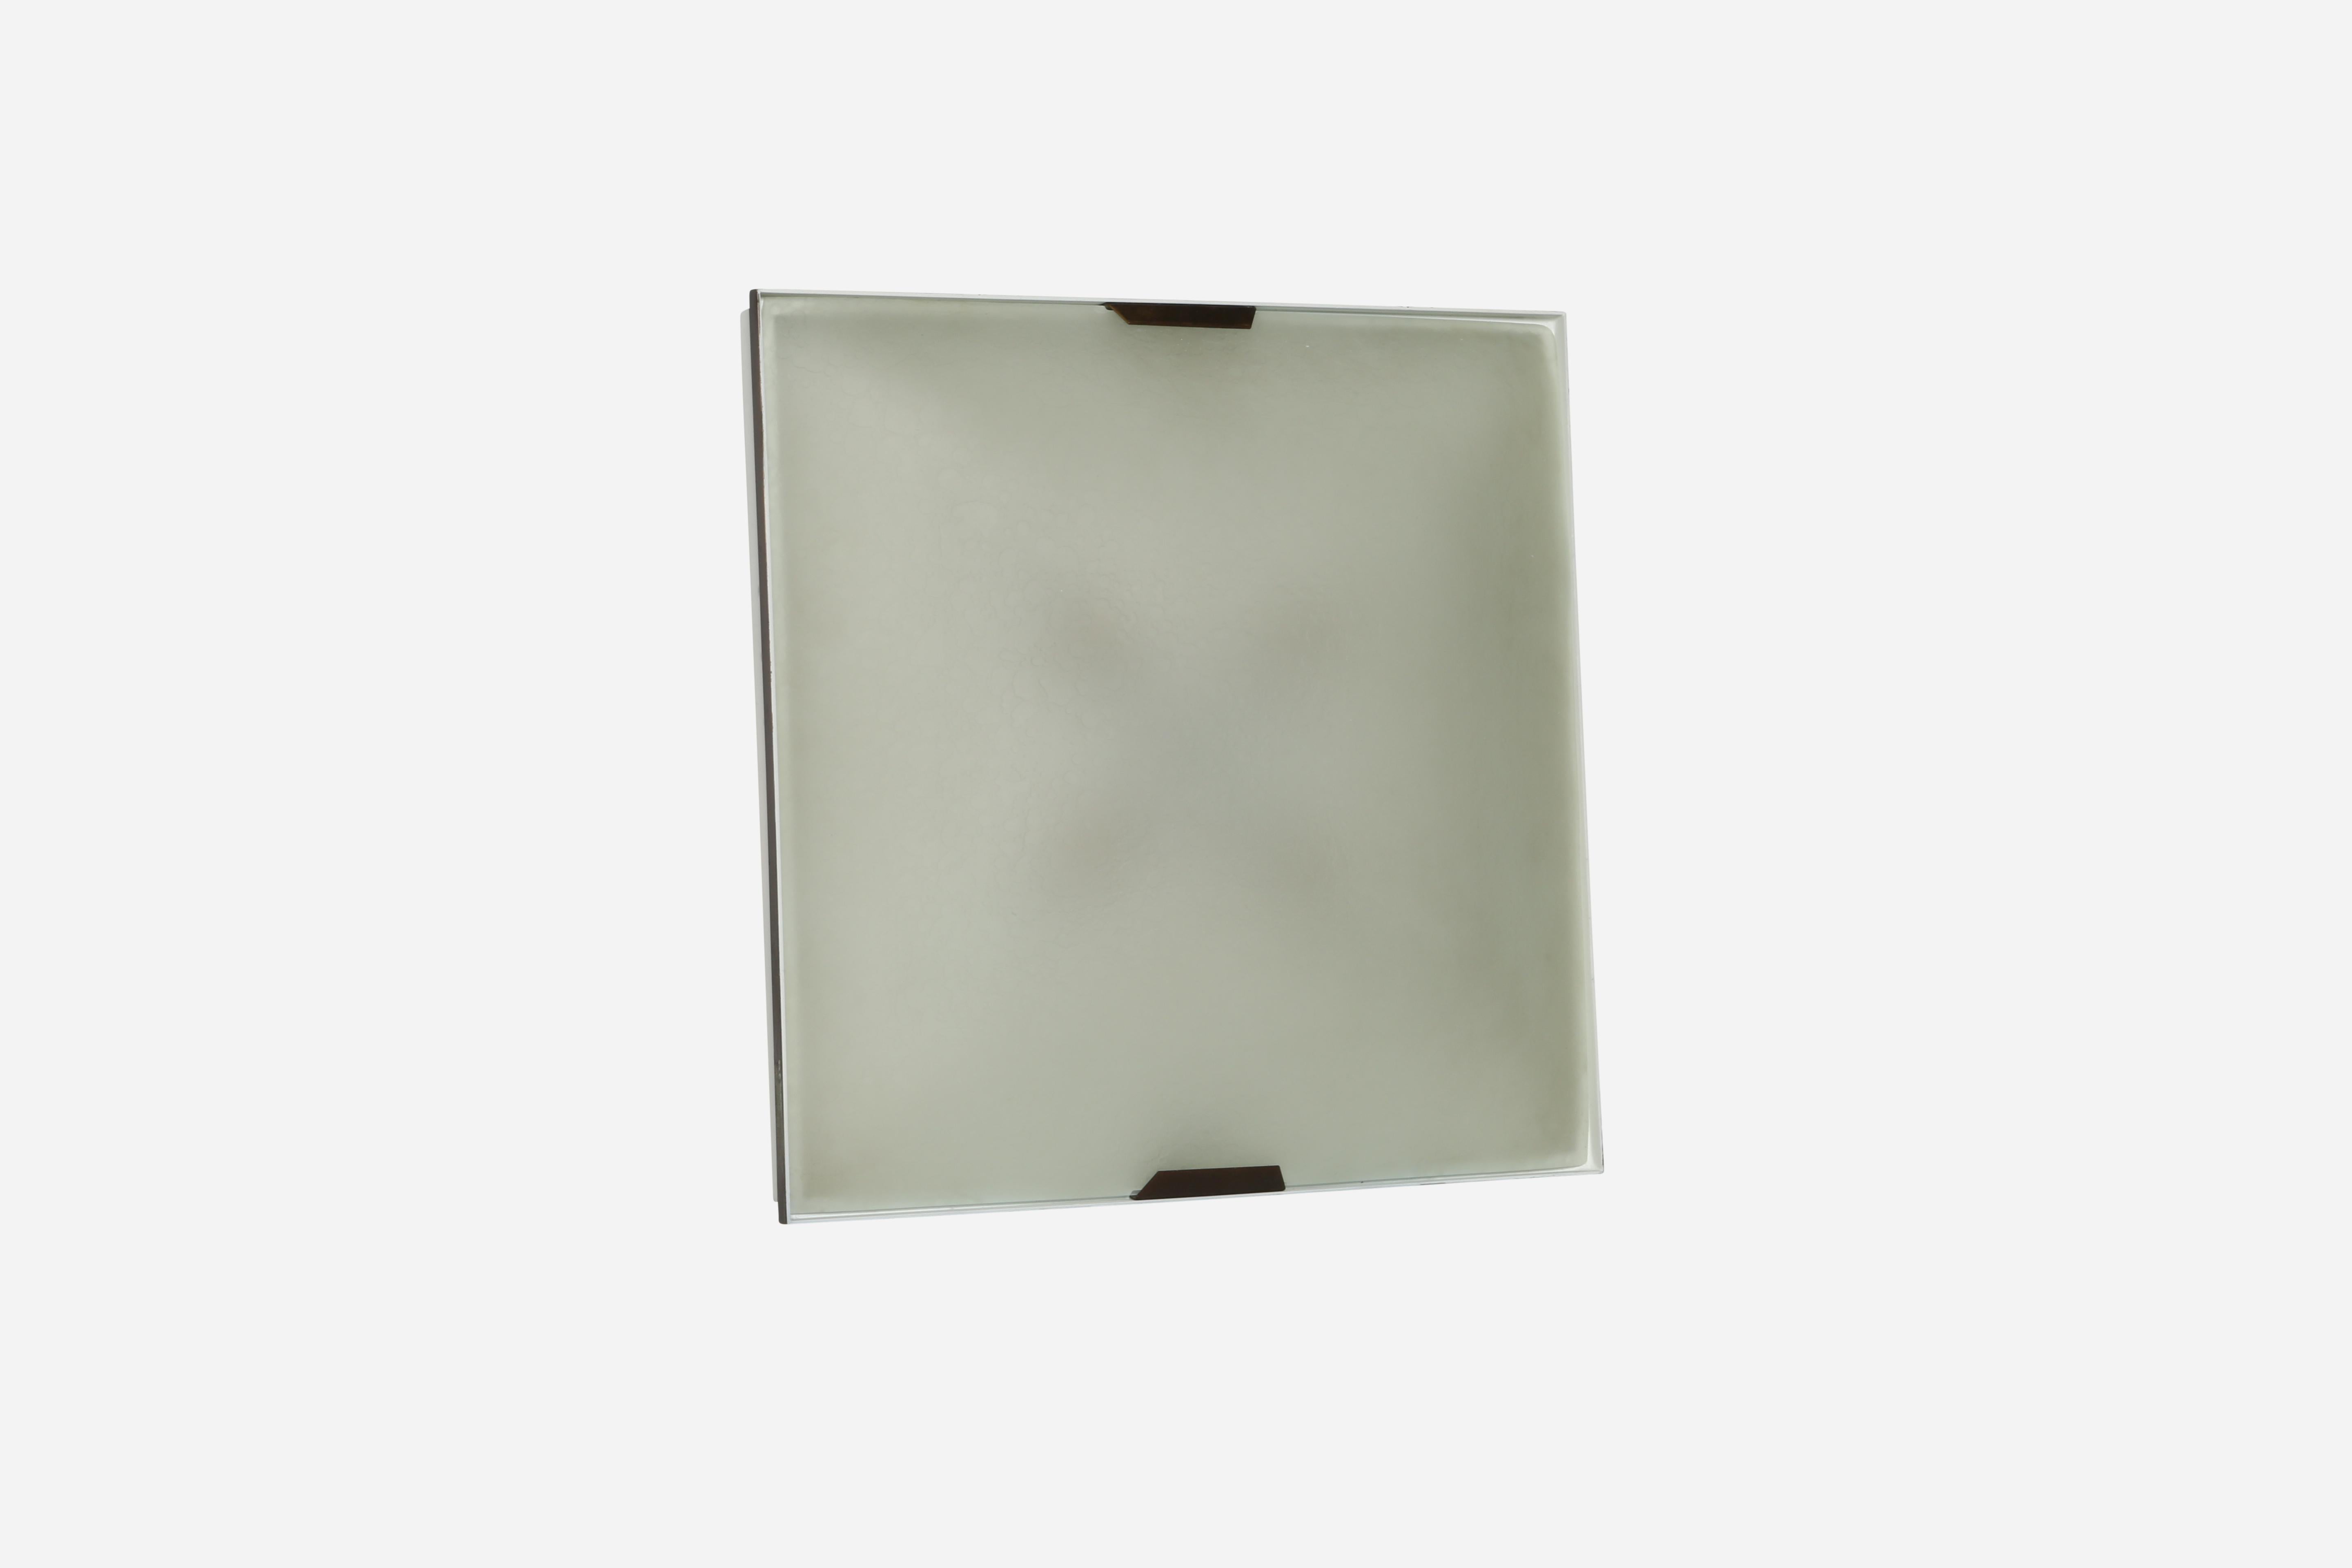 Stilnovo Flush Mount ceiling or wall light In Good Condition For Sale In Brooklyn, NY